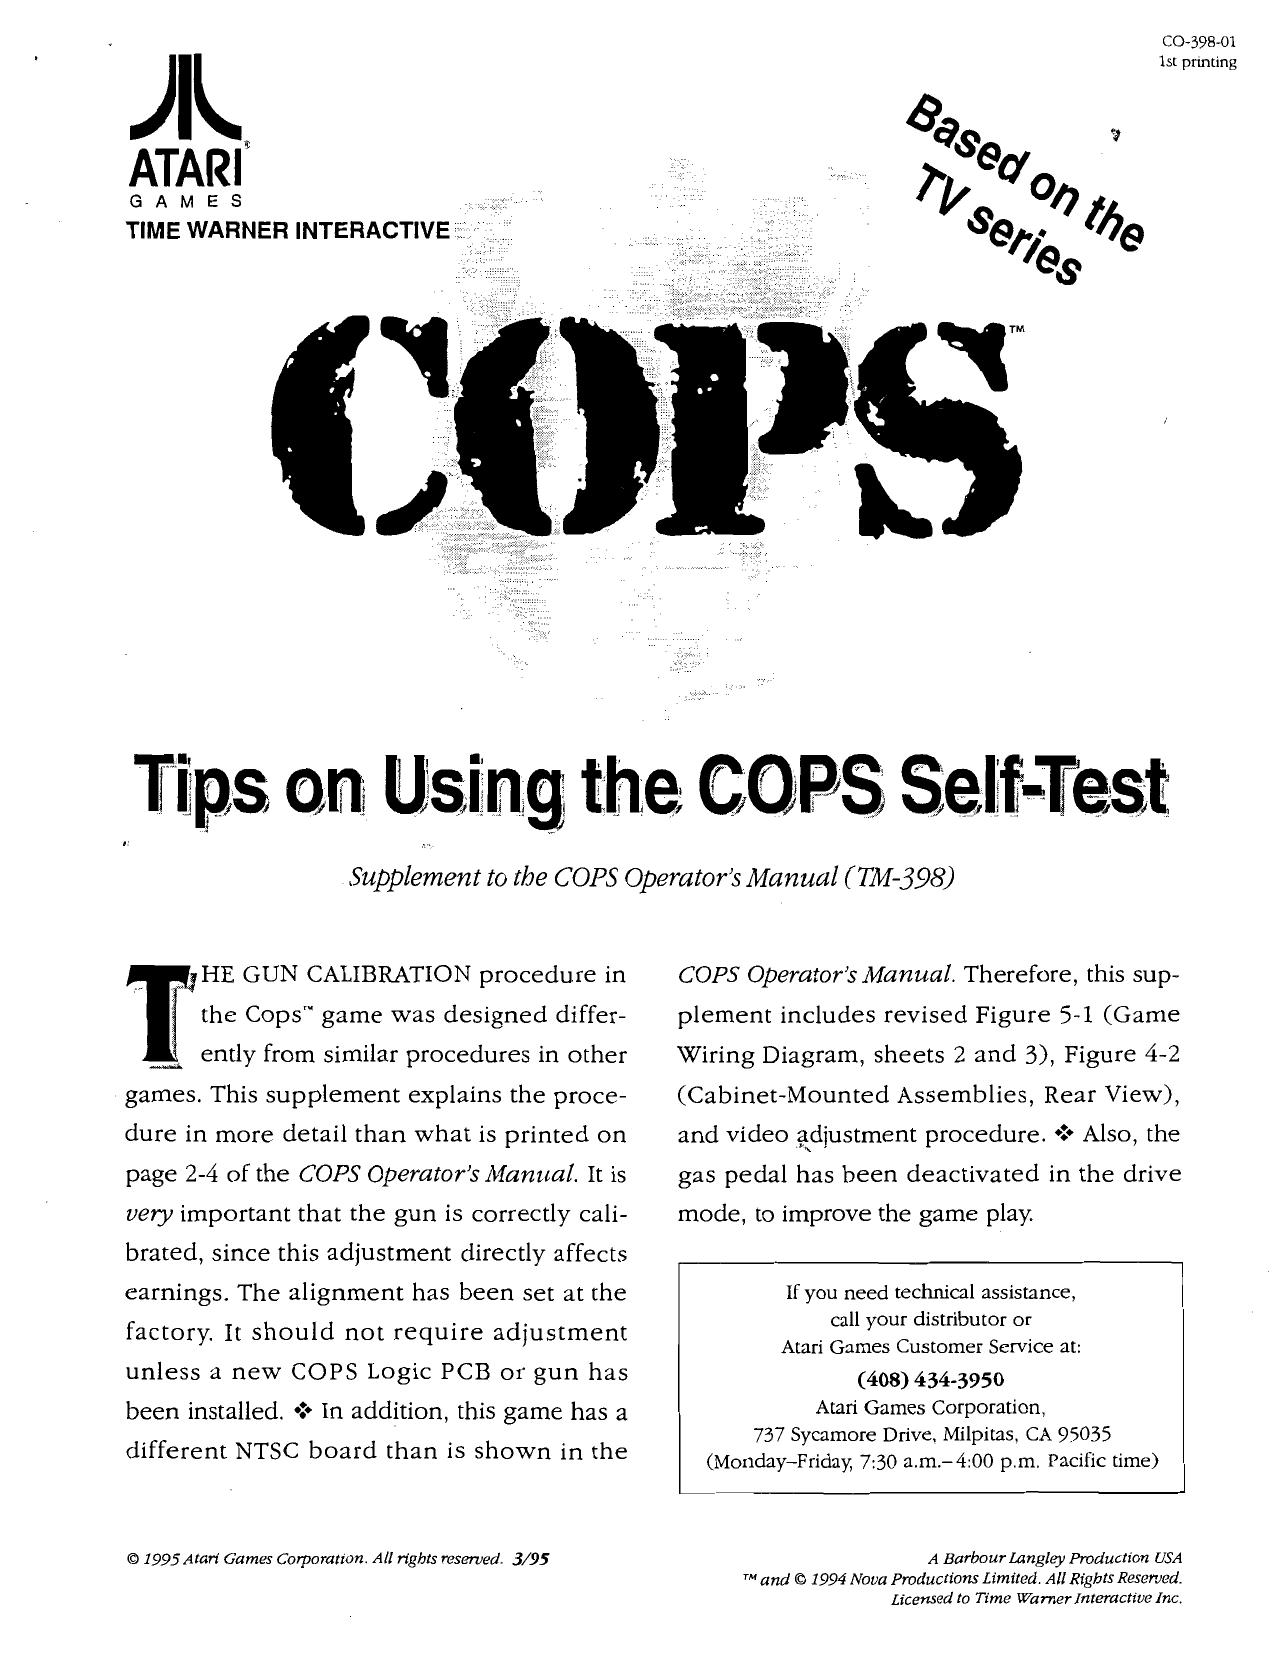 Cops CO-398-01 1st Printing